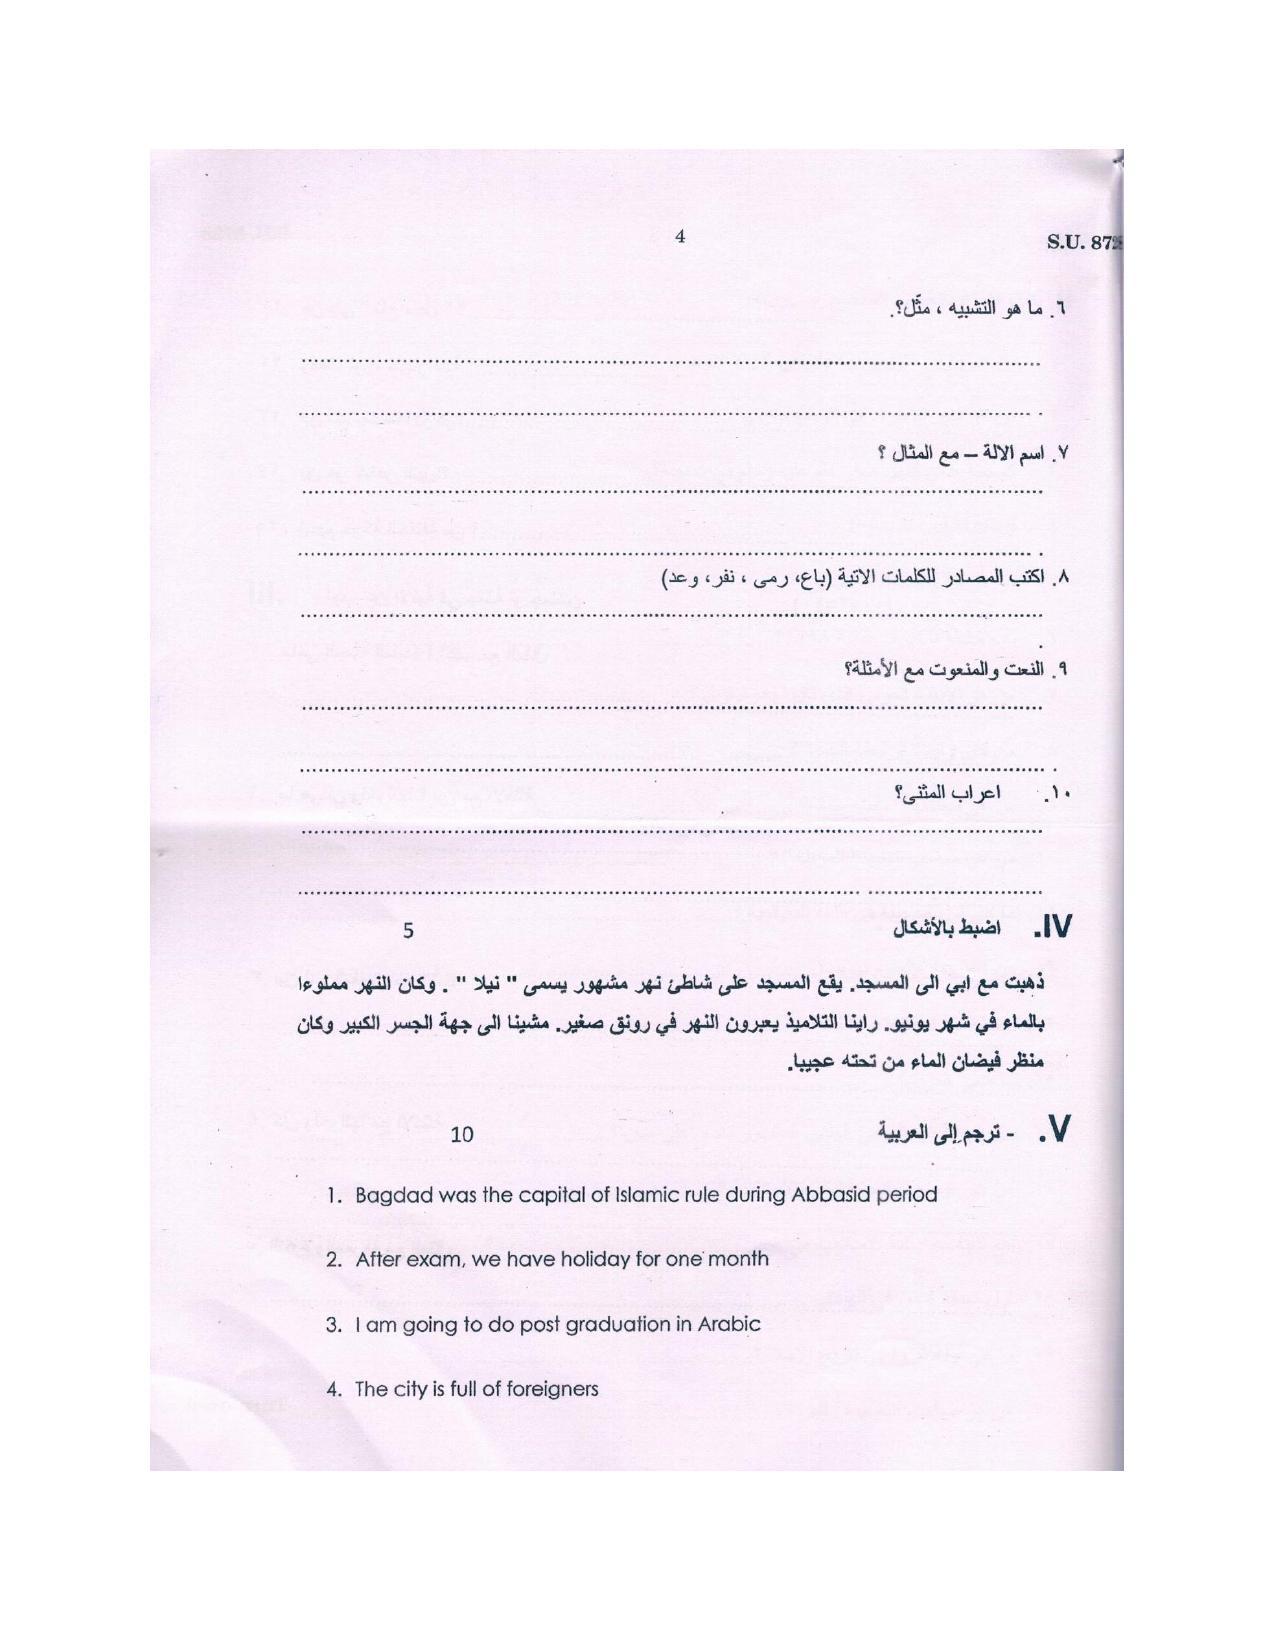 SSUS Entrance Exam ARABIC 2018 Question Paper - Page 4